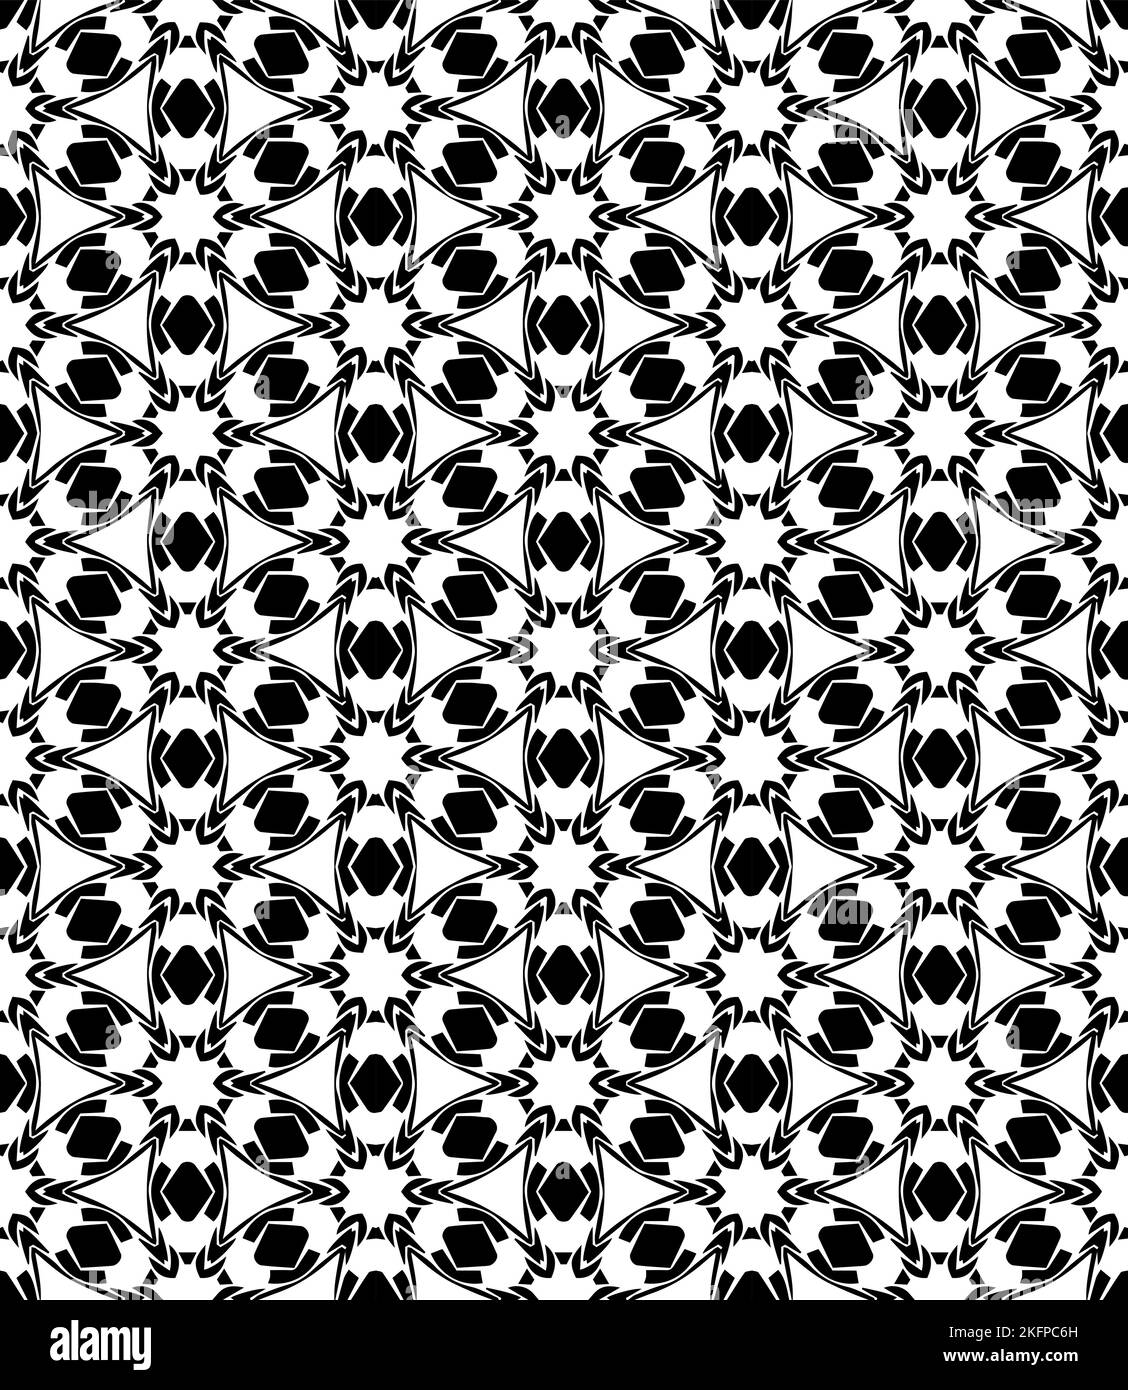 Black and white seamless abstract pattern. Background and backdrop. Grayscale ornamental design. Mosaic ornaments. Vector graphic illustration. EPS10. Stock Vector